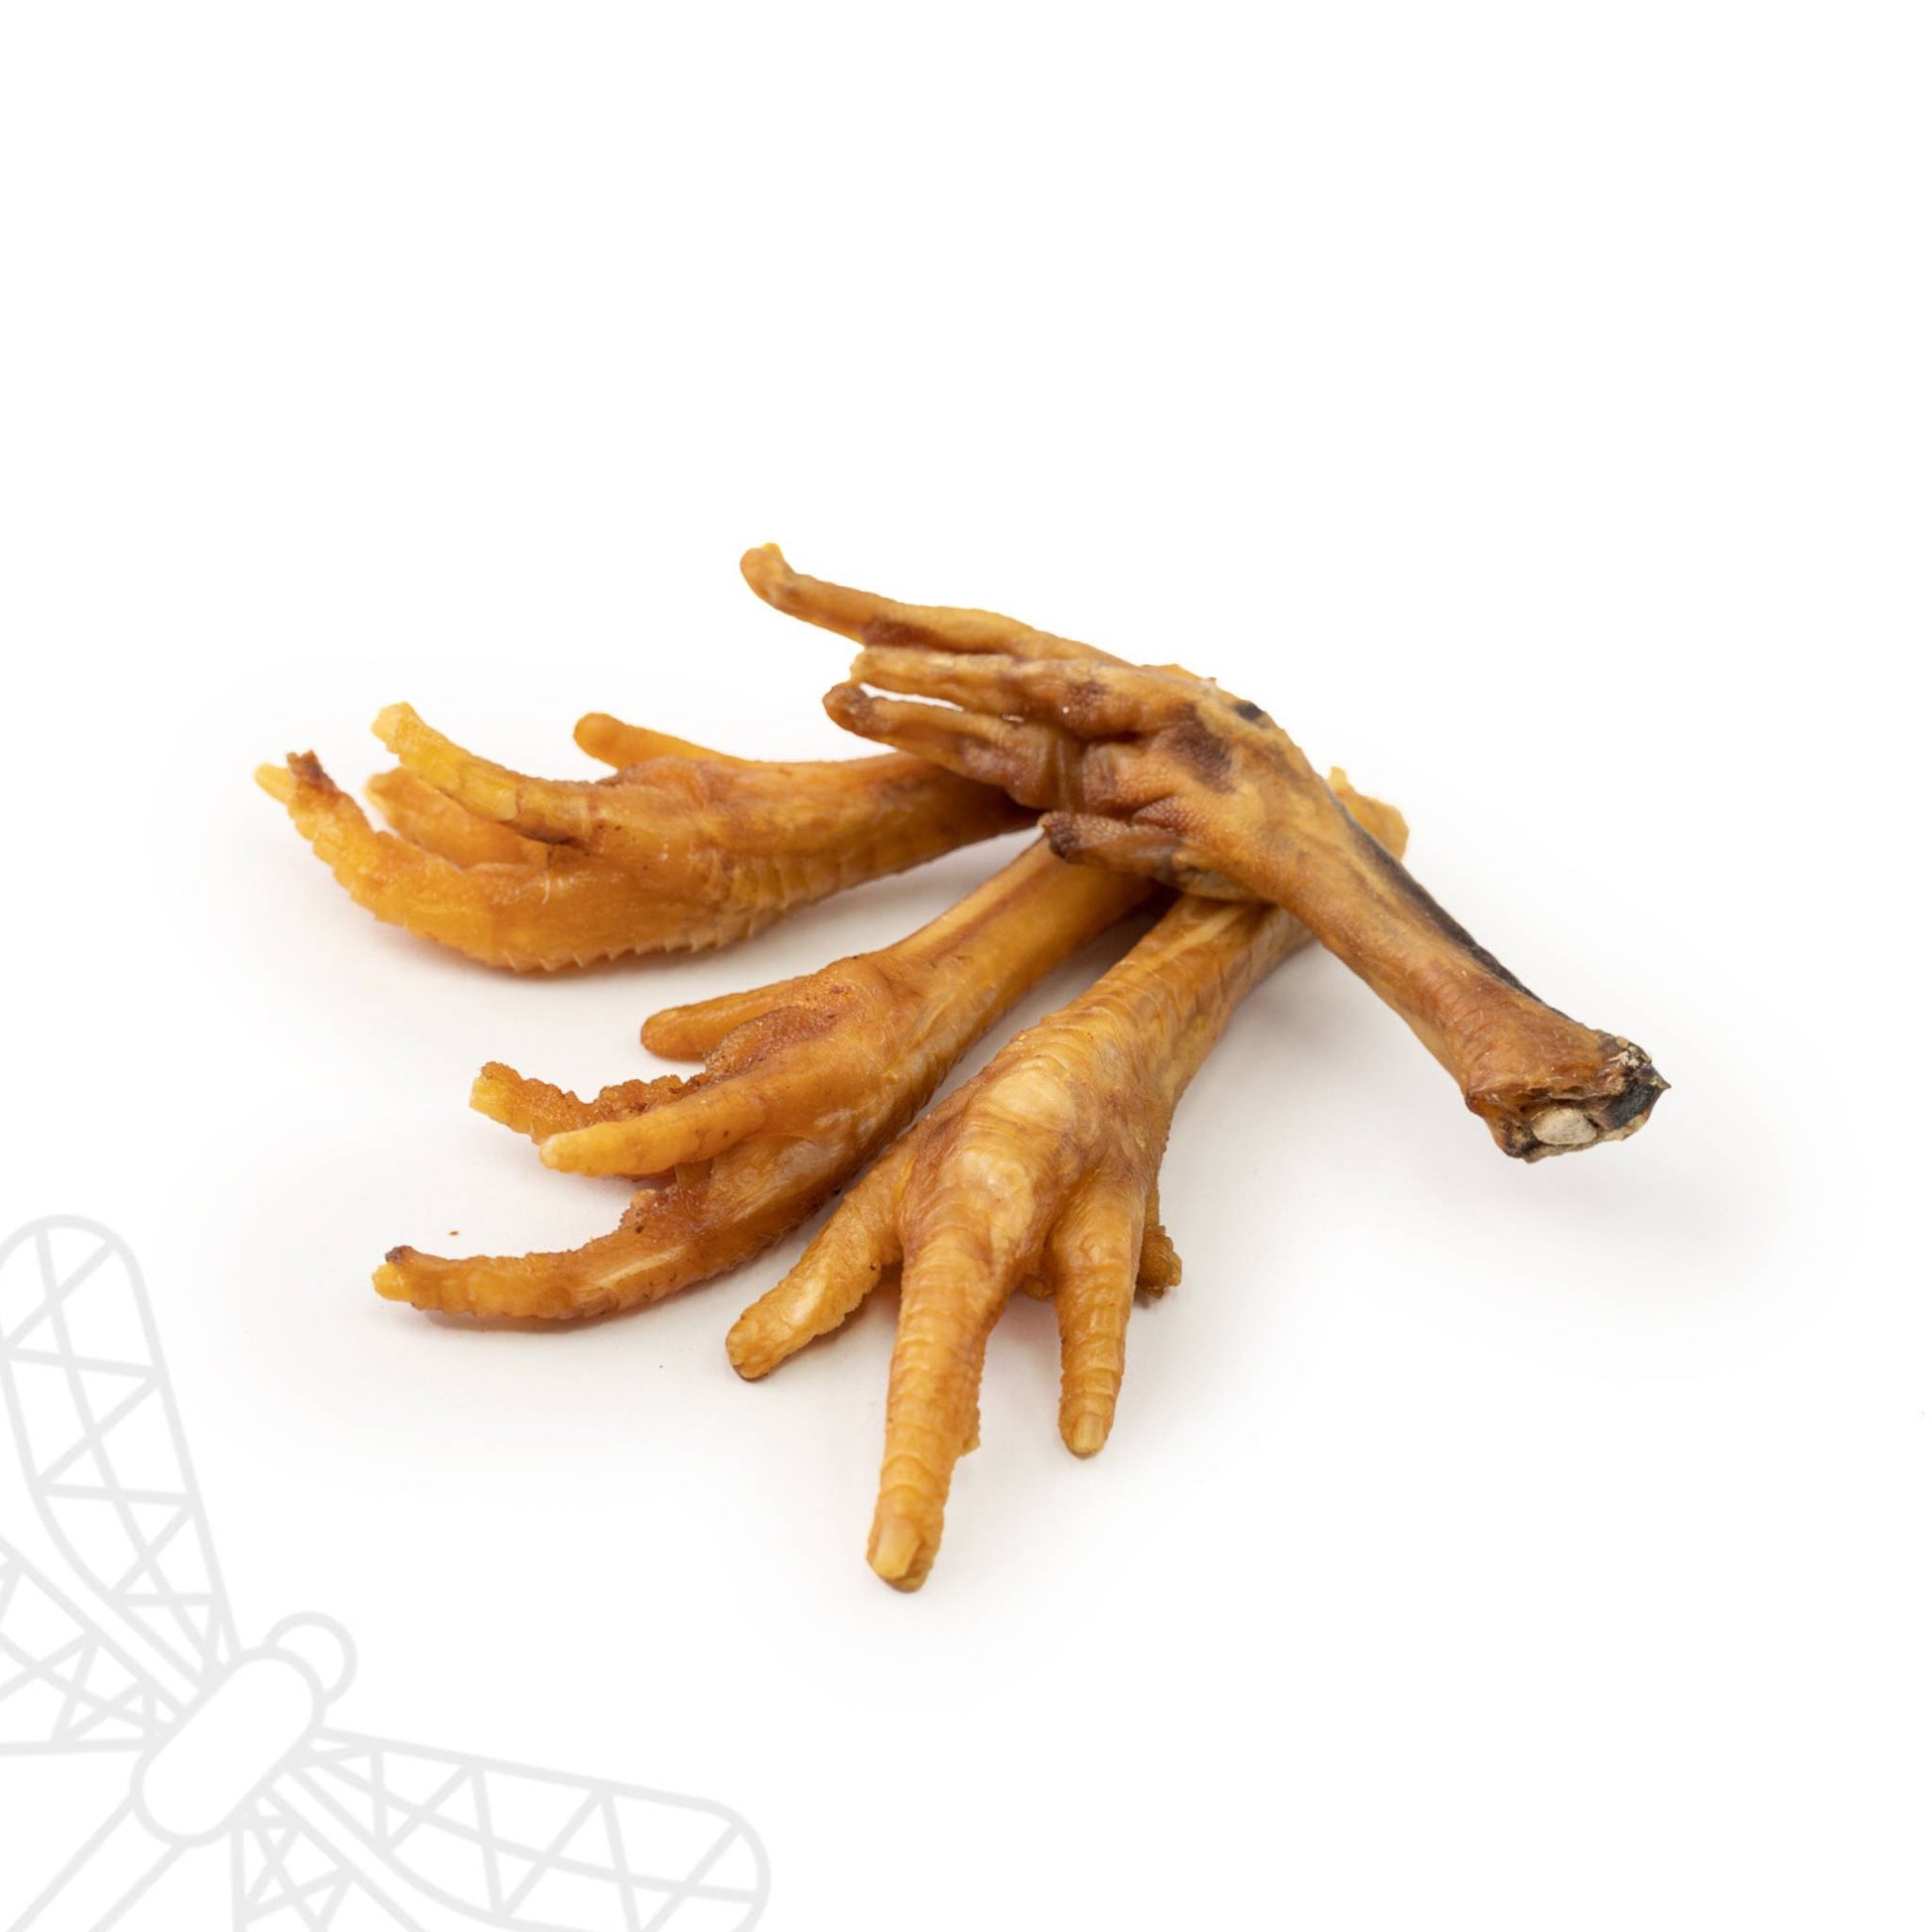 Chicken feet for dogs